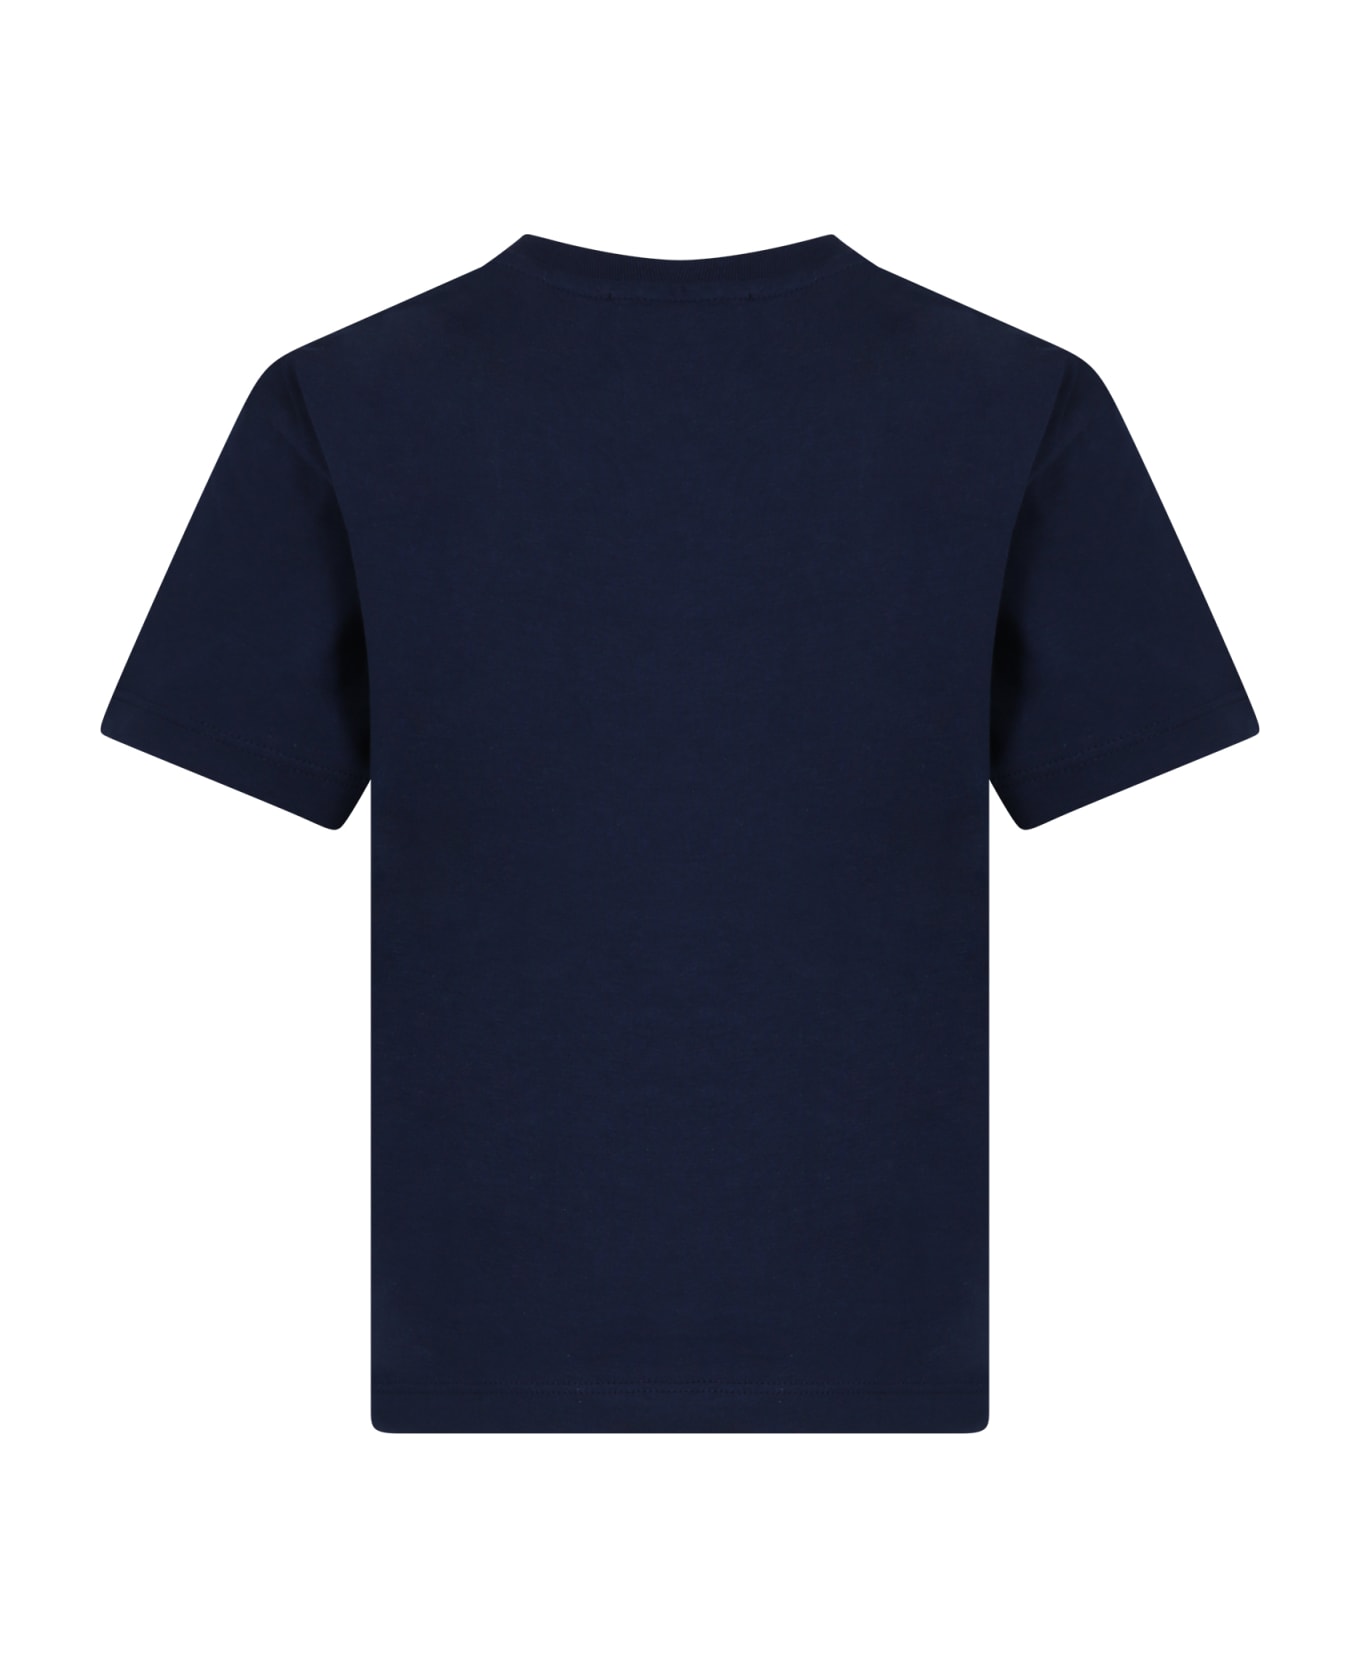 MSGM Blue T-shirt For Kids With Logo - Blue